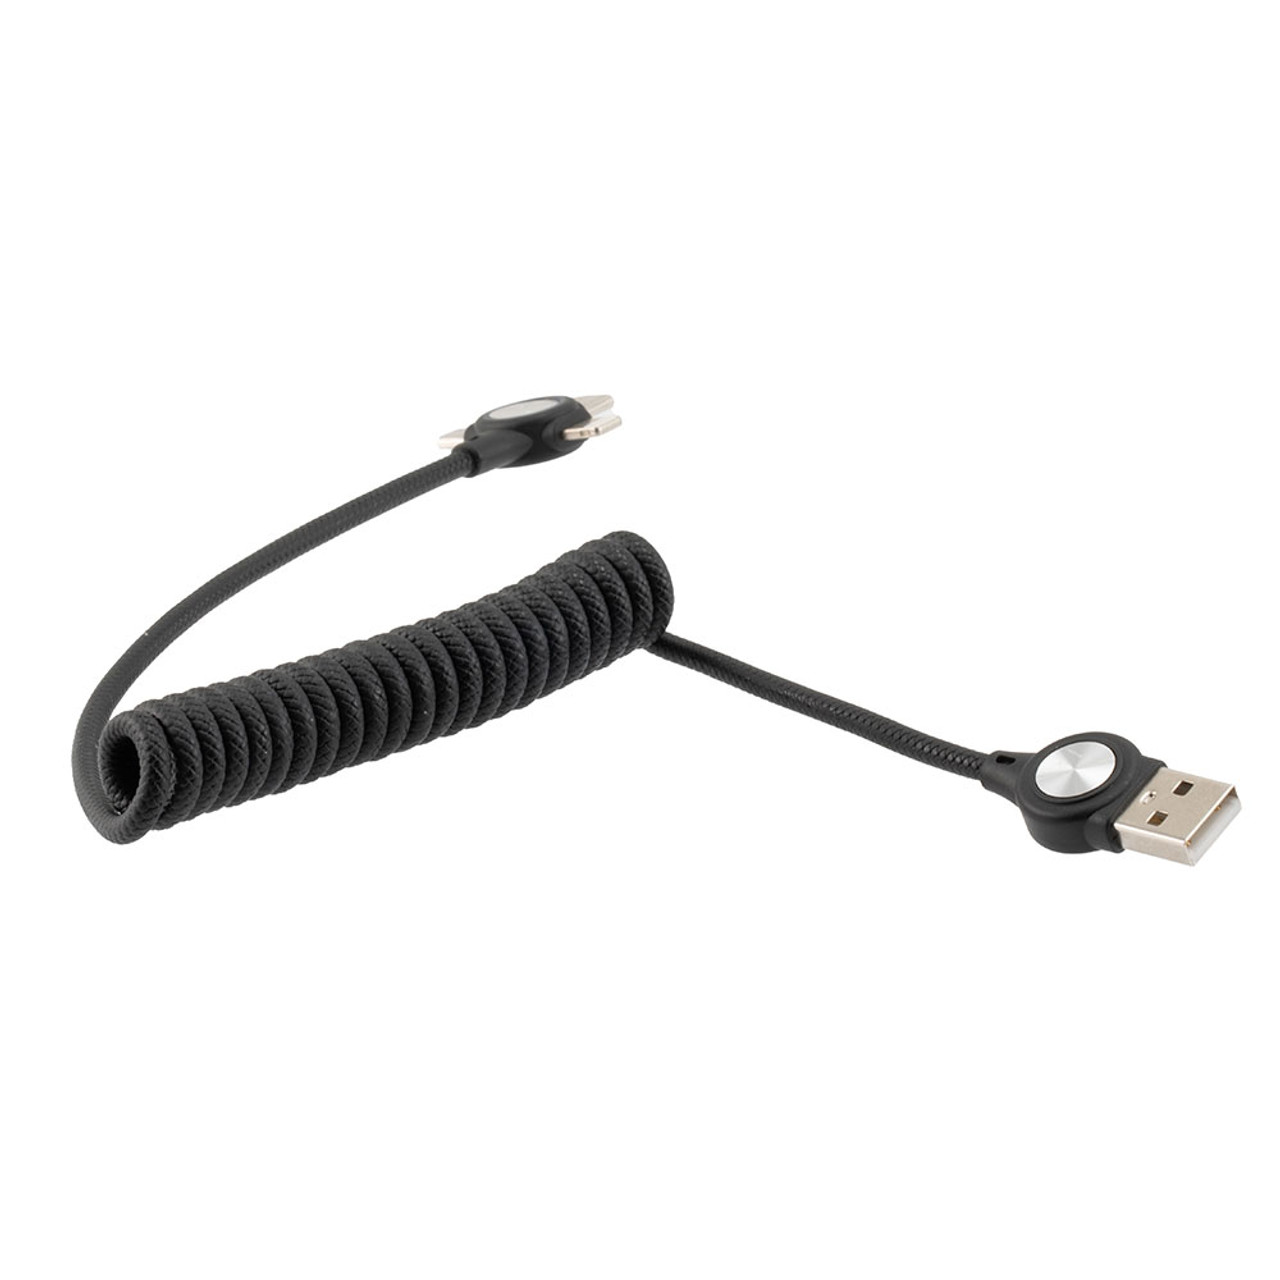 NavePoint USB 2.0 PVC Nylon Braided Cable, Black, USB A Male to Type C/Micro/Lightning Compatible, 1 Foot Coil